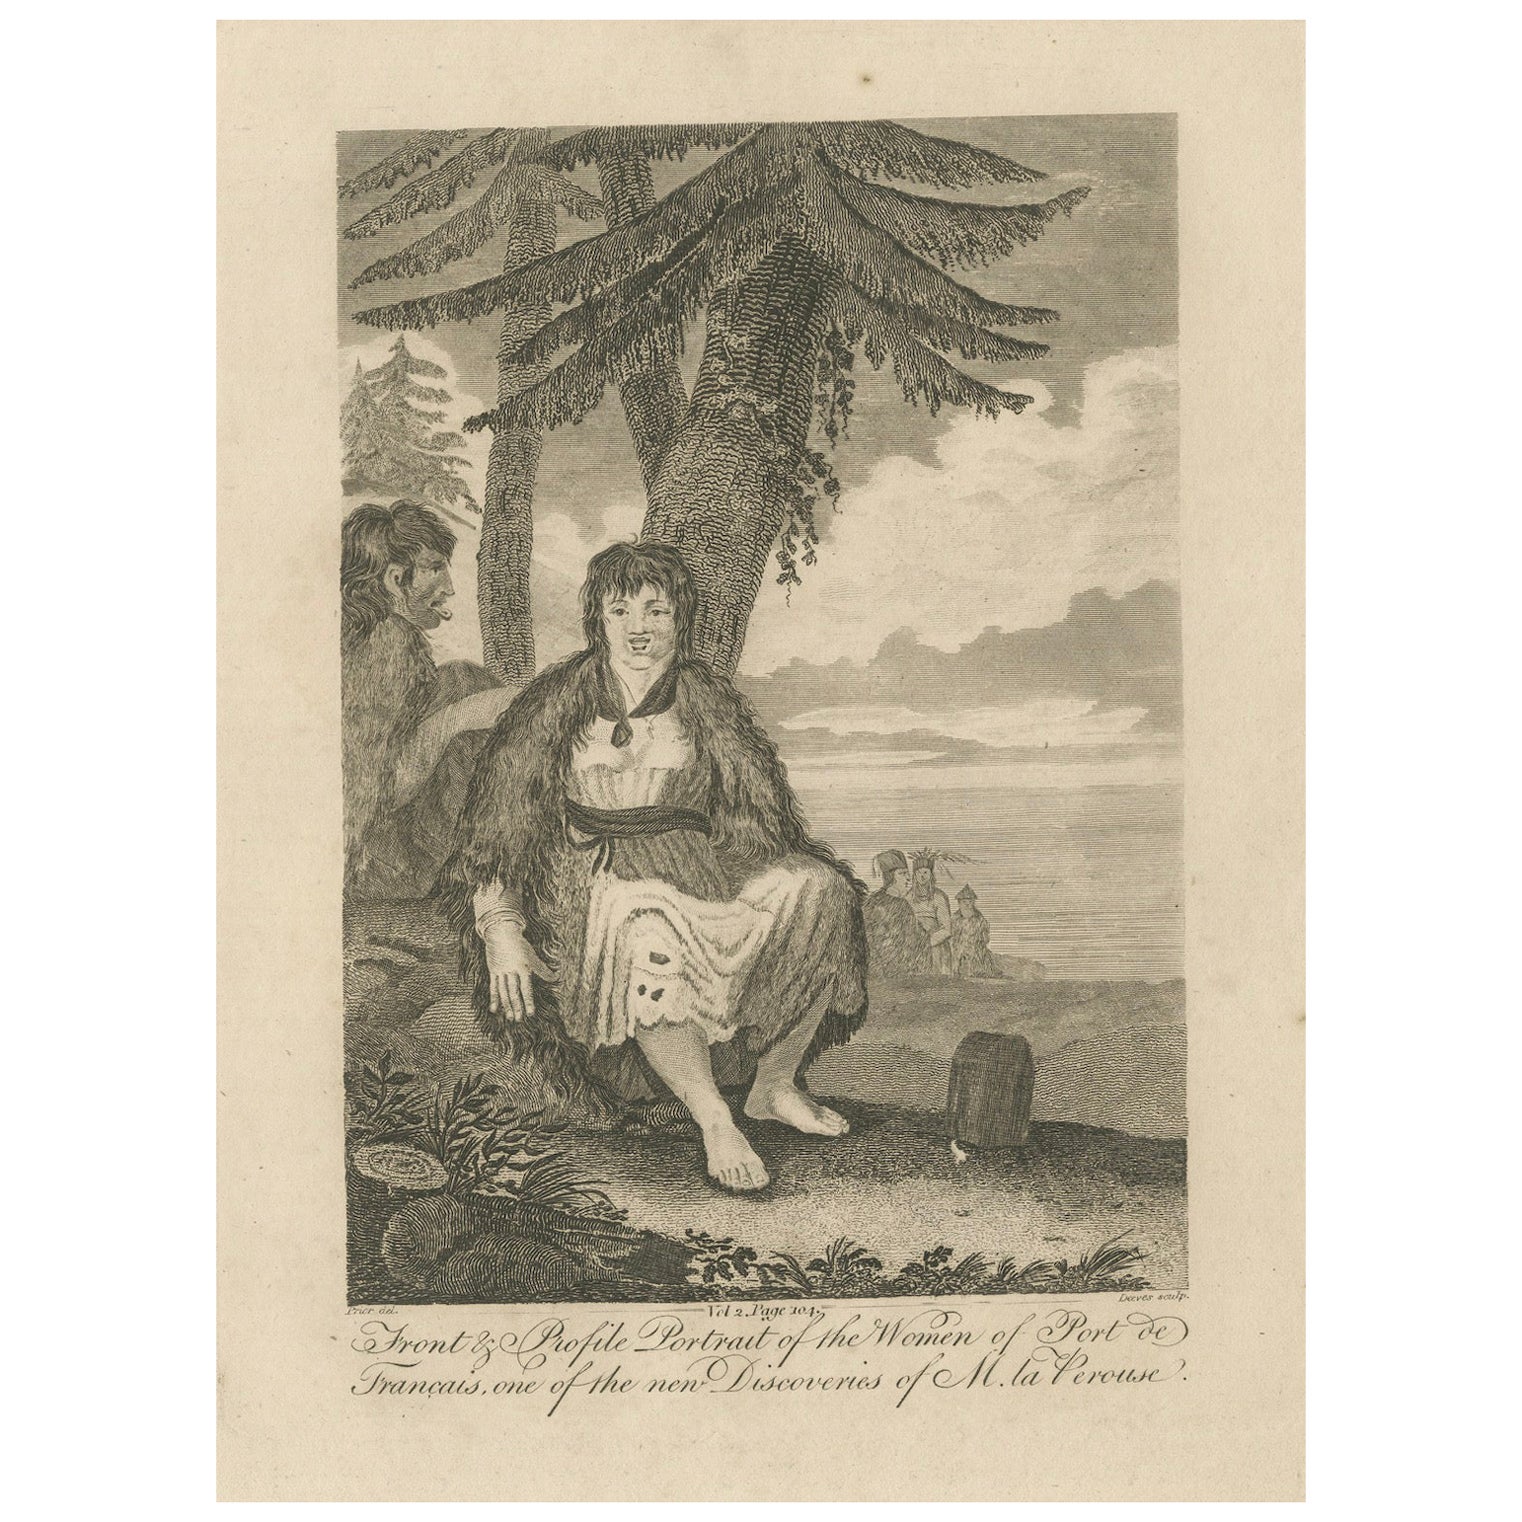 Dual Portraiture of a Woman from Port Francais, 1807